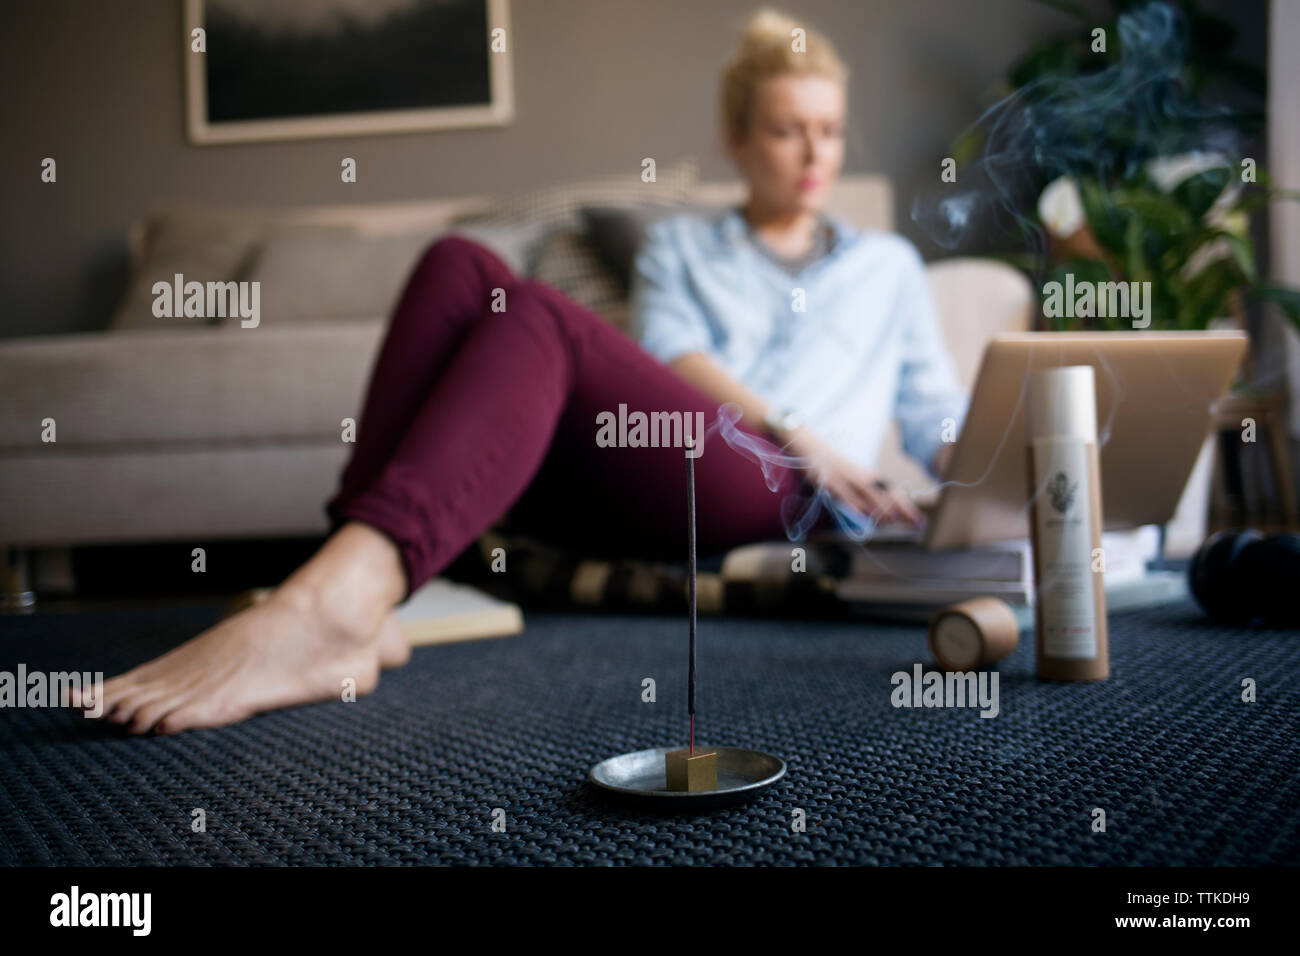 Smoke coming out from incense stick on floor with woman working in background Stock Photo